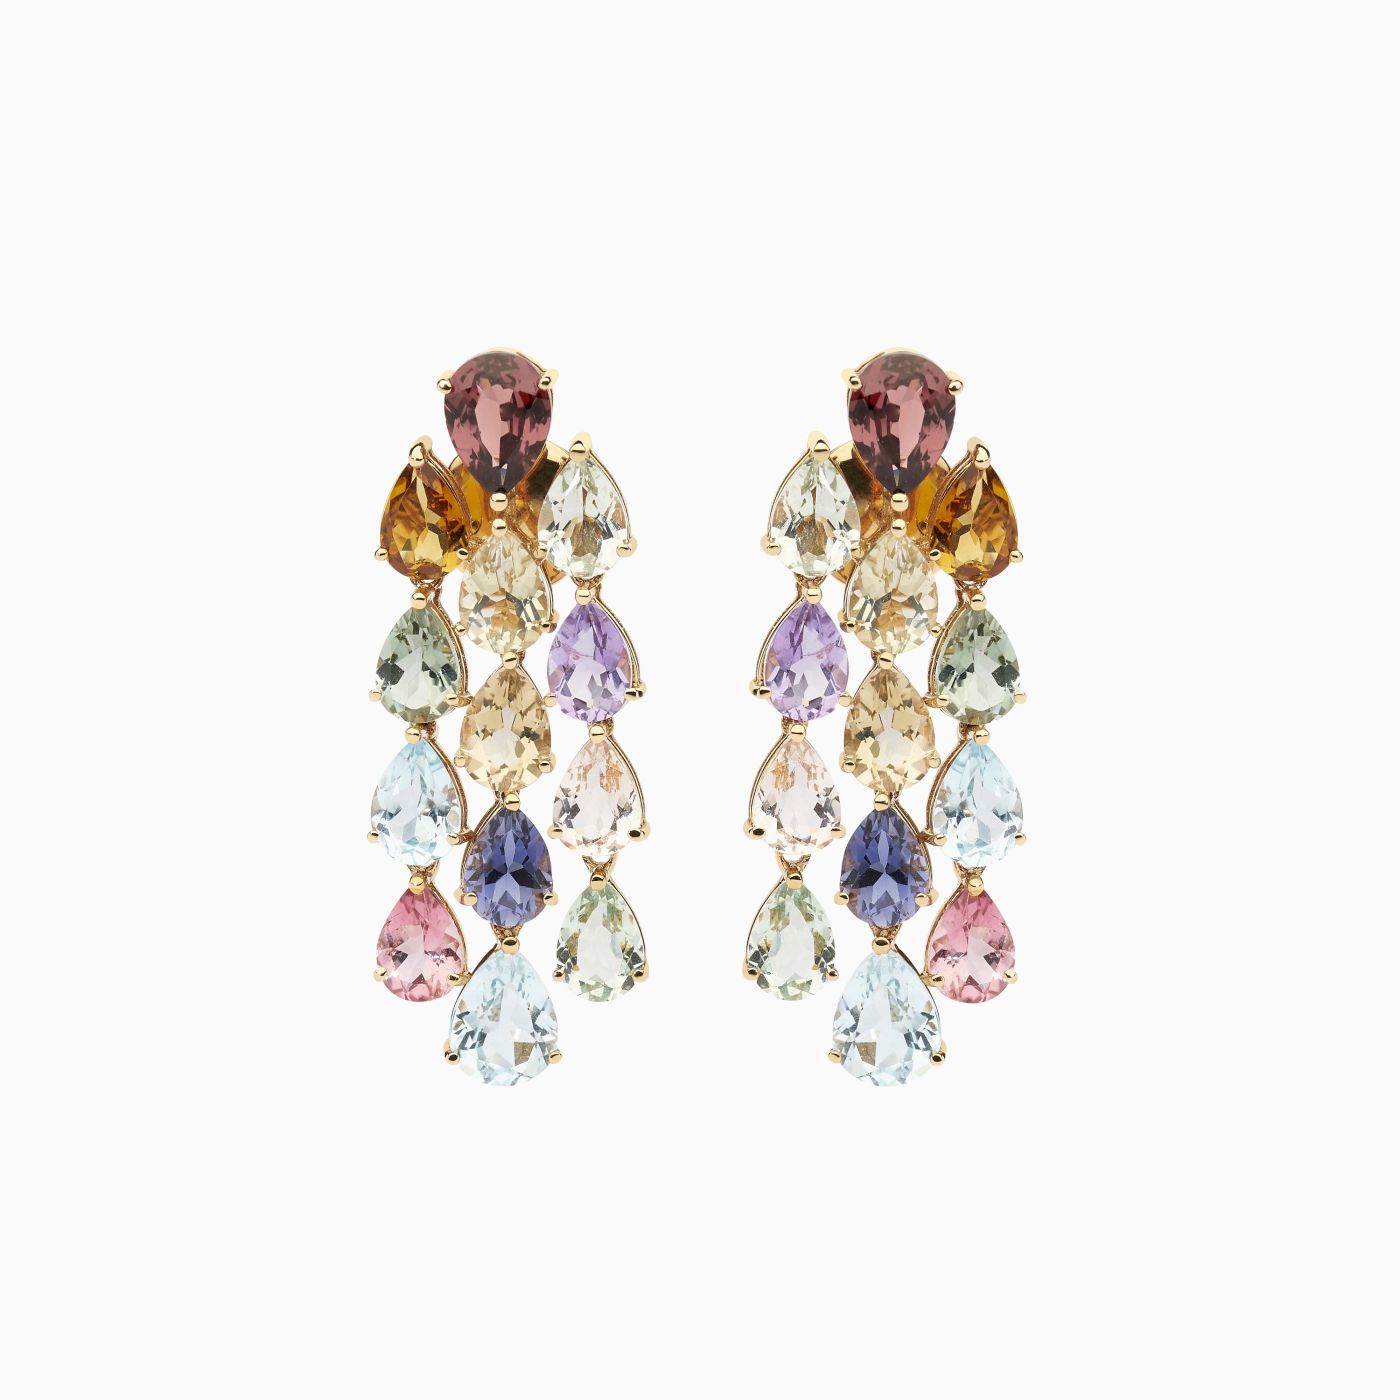 White gold earrings with colourful gems